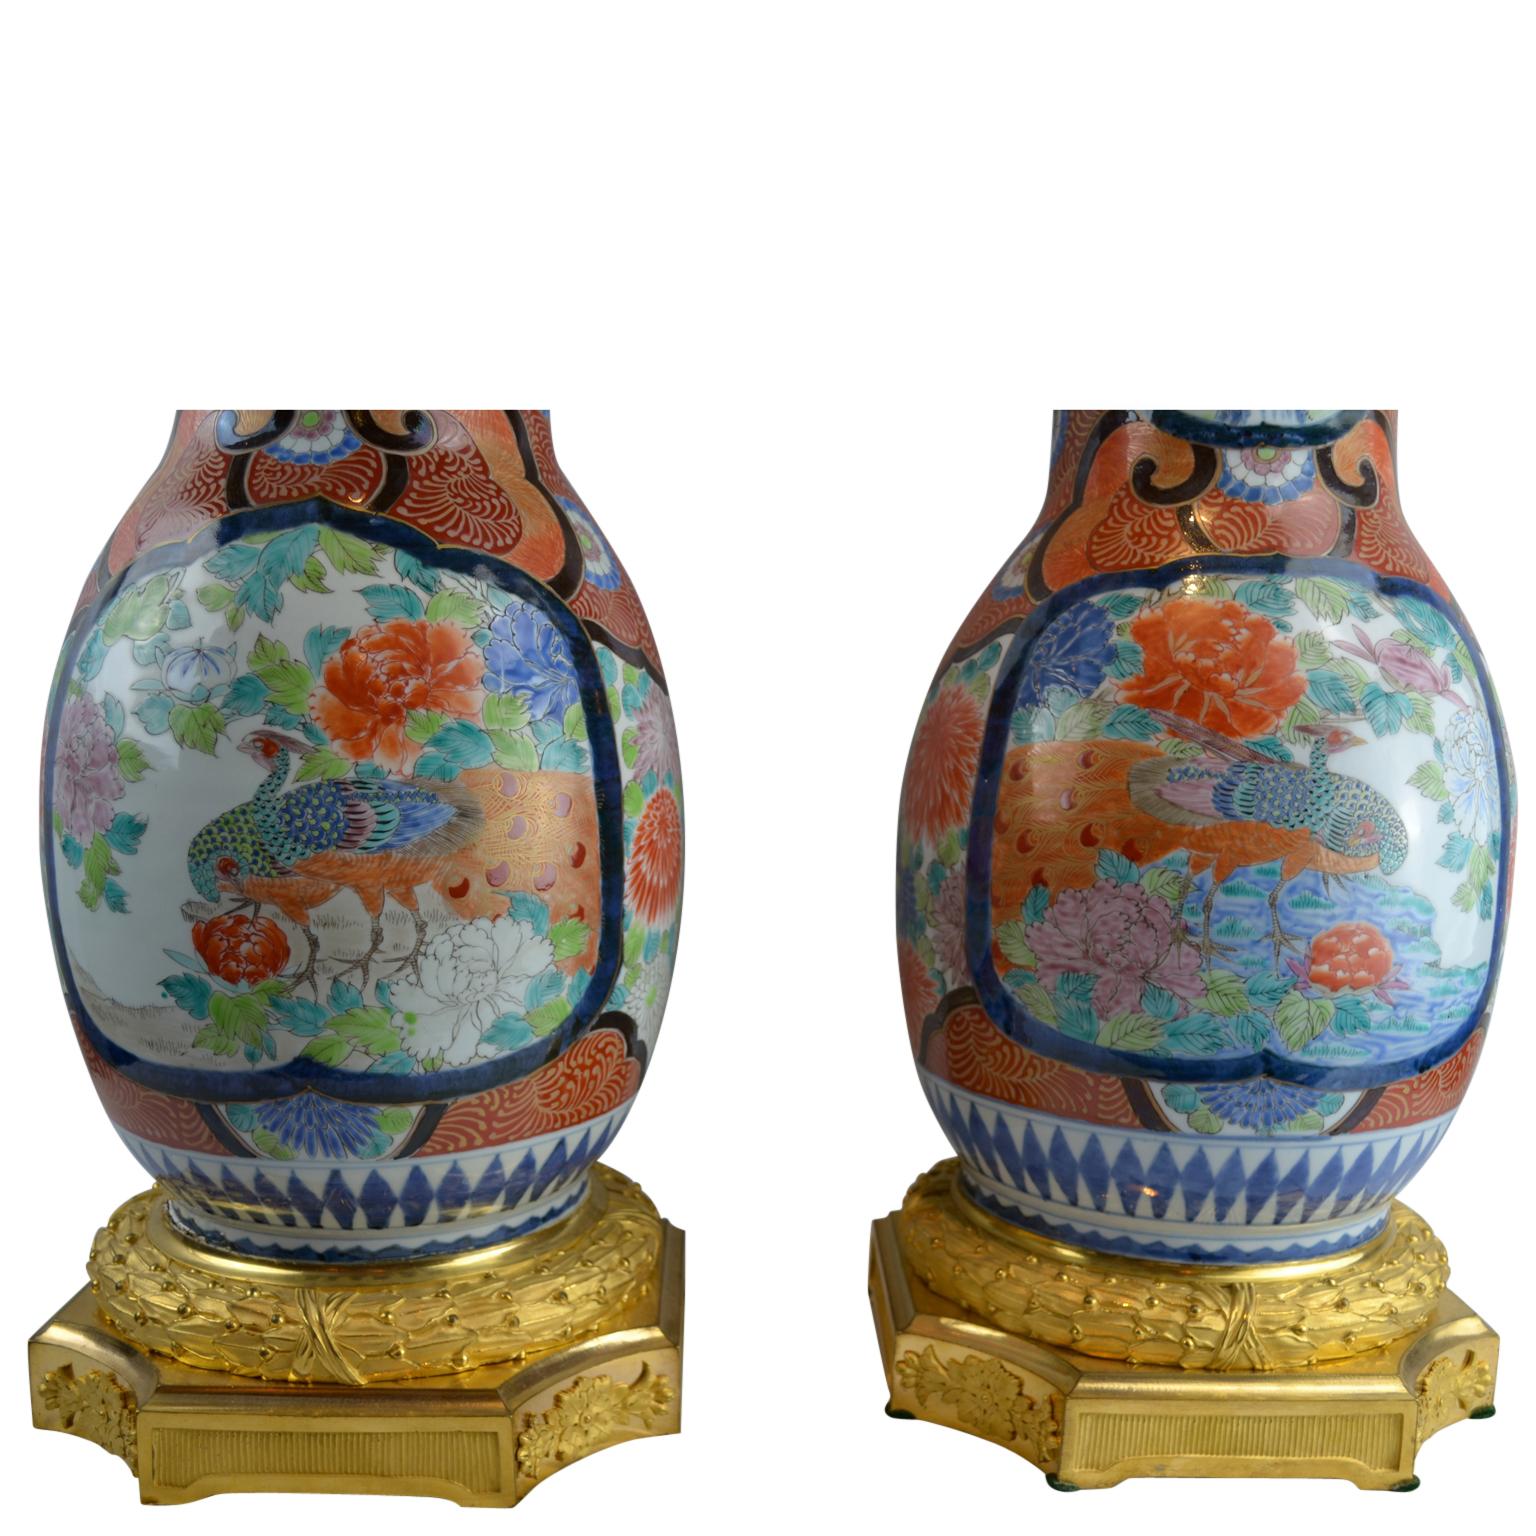 Glazed Palatial 19th Century Japanese Imari Vases with French Gilt Bronze Mounts, Pair For Sale